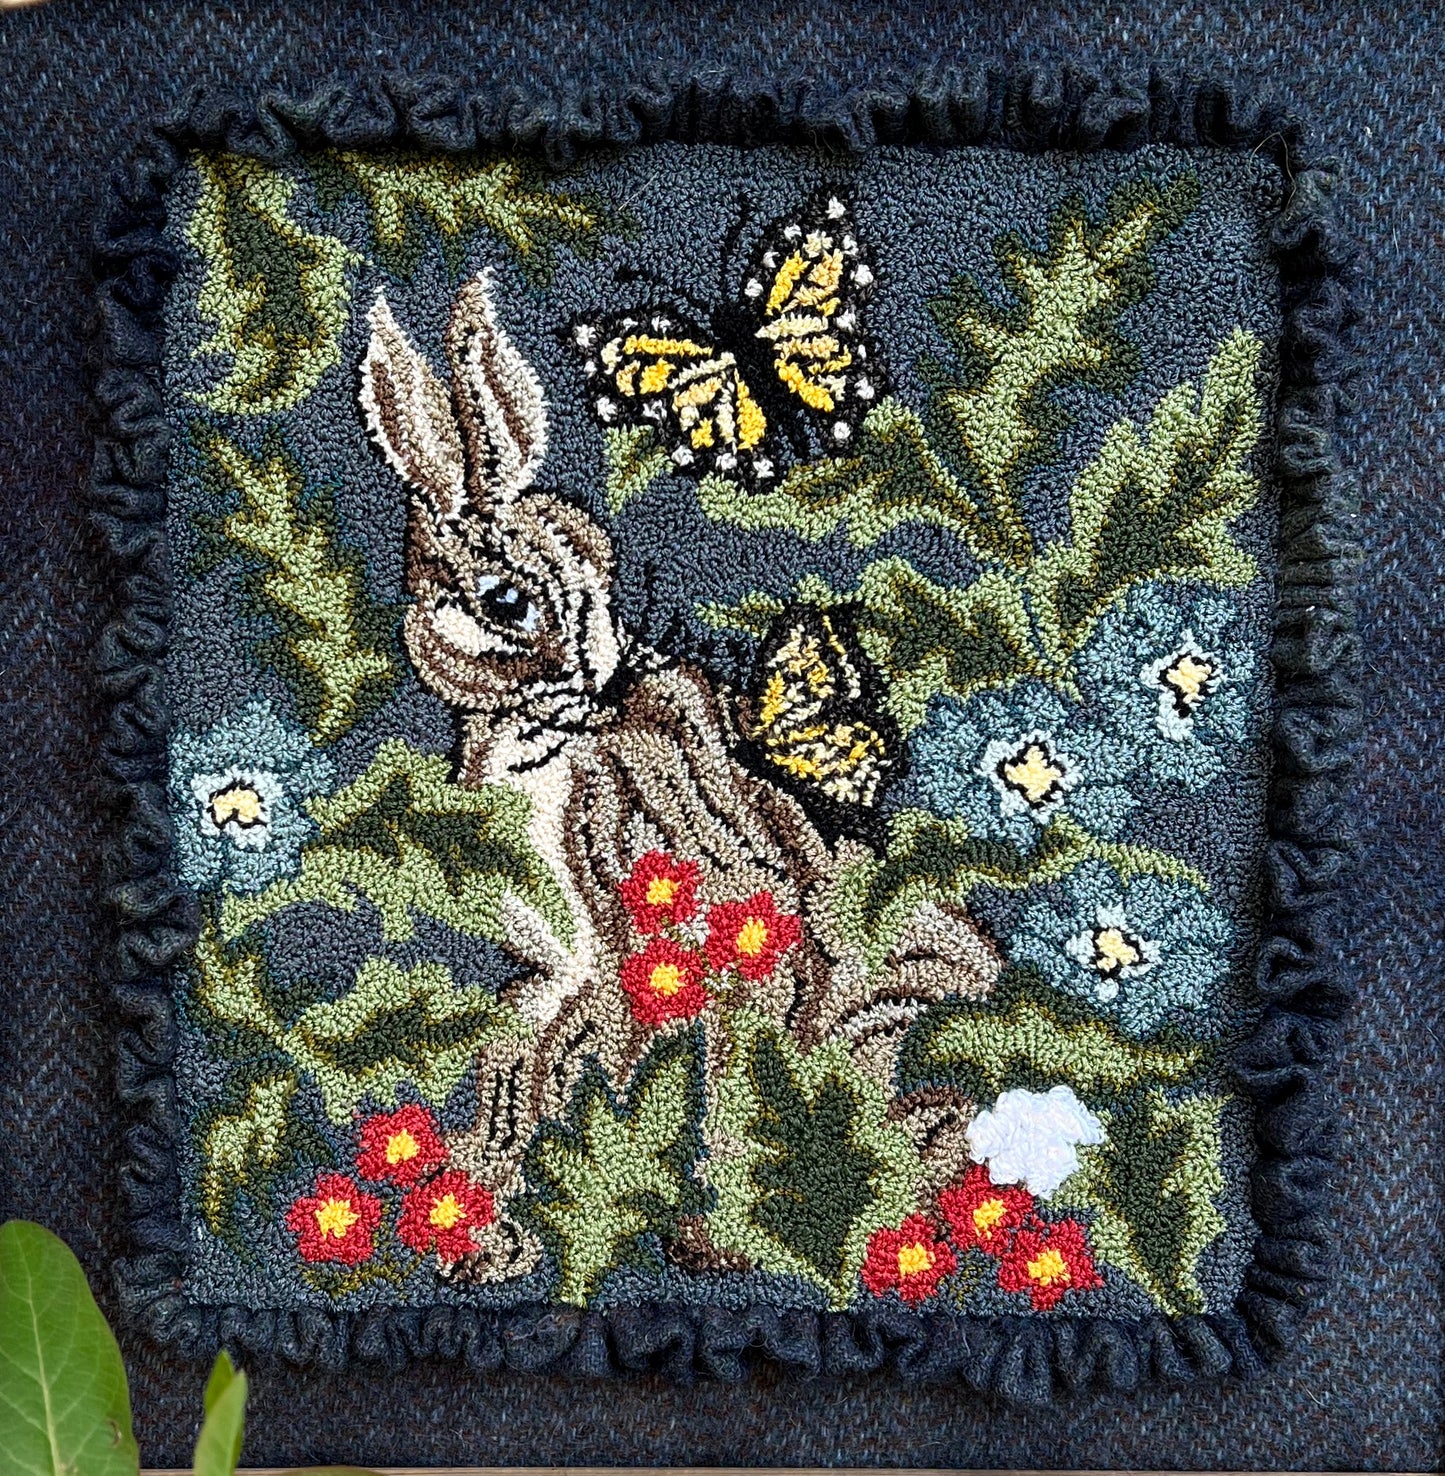 Hare with Friend Punch Needle Pattern by Orphaned Wool. This lovely bunny and butterflies design was created using DMC Floss. This little rabbit is nestled in with flowers and foliage and sweet butterflies.